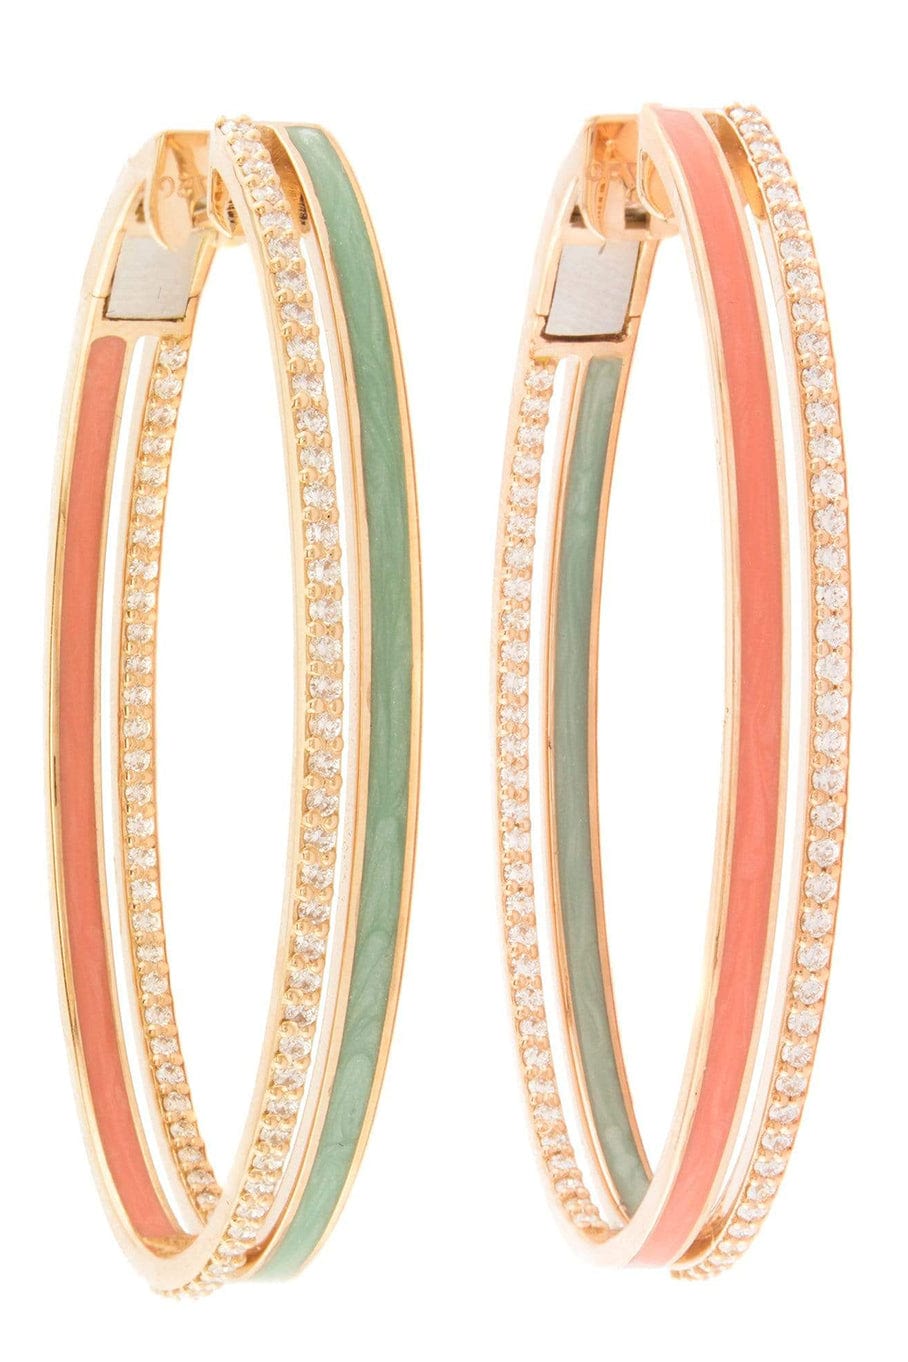 ALESSA JEWELRY-Spectrum Paraiba and Coral Hoop Earrings-ROSE GOLD